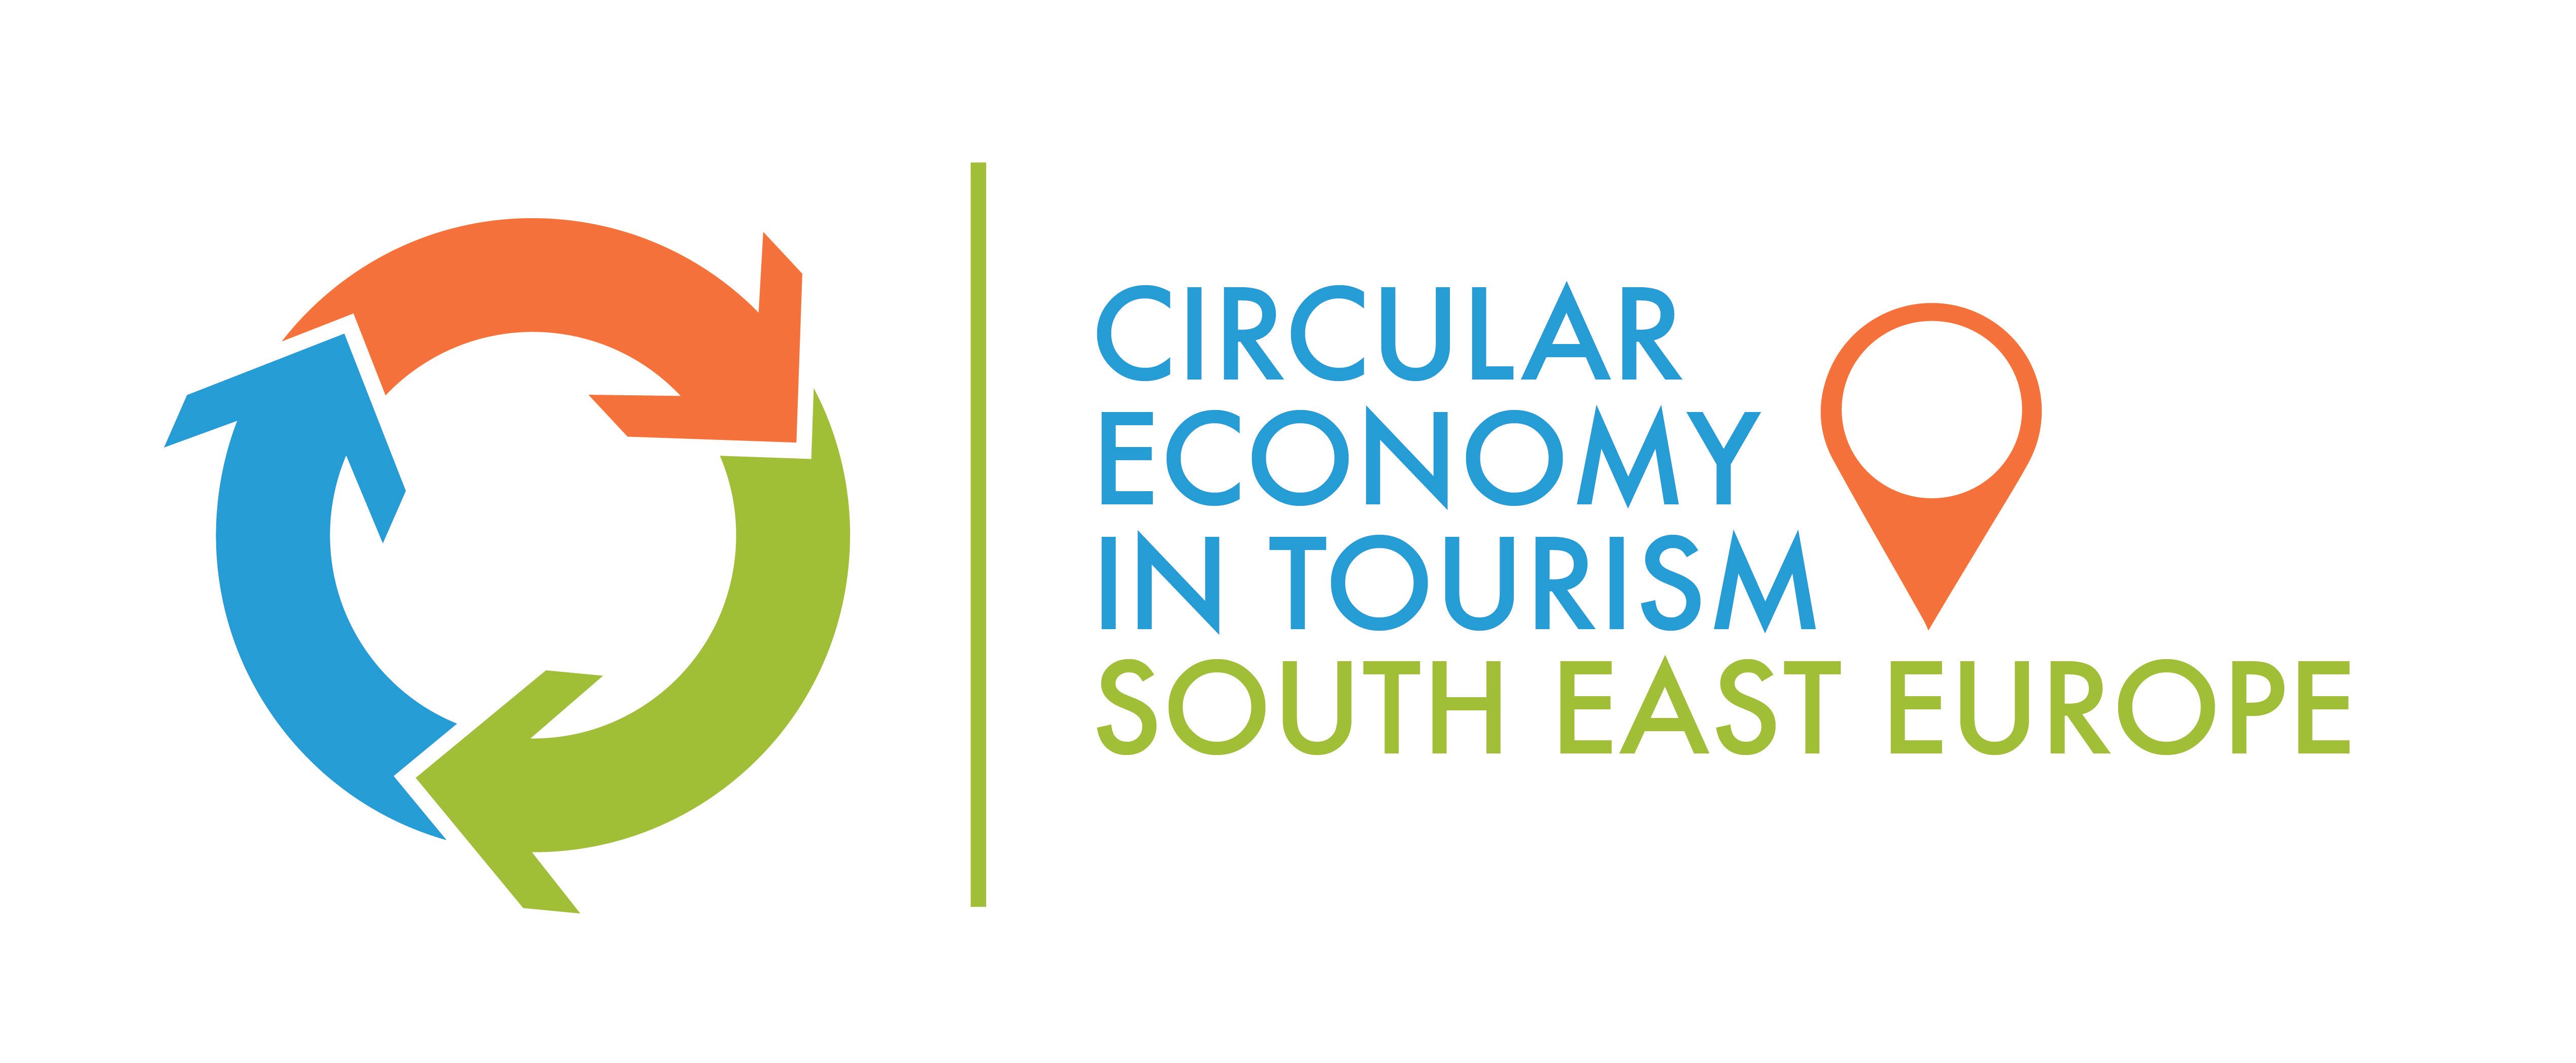 Unido Logo - Conference on Circular Economy in Tourism in South East Europe | UNIDO